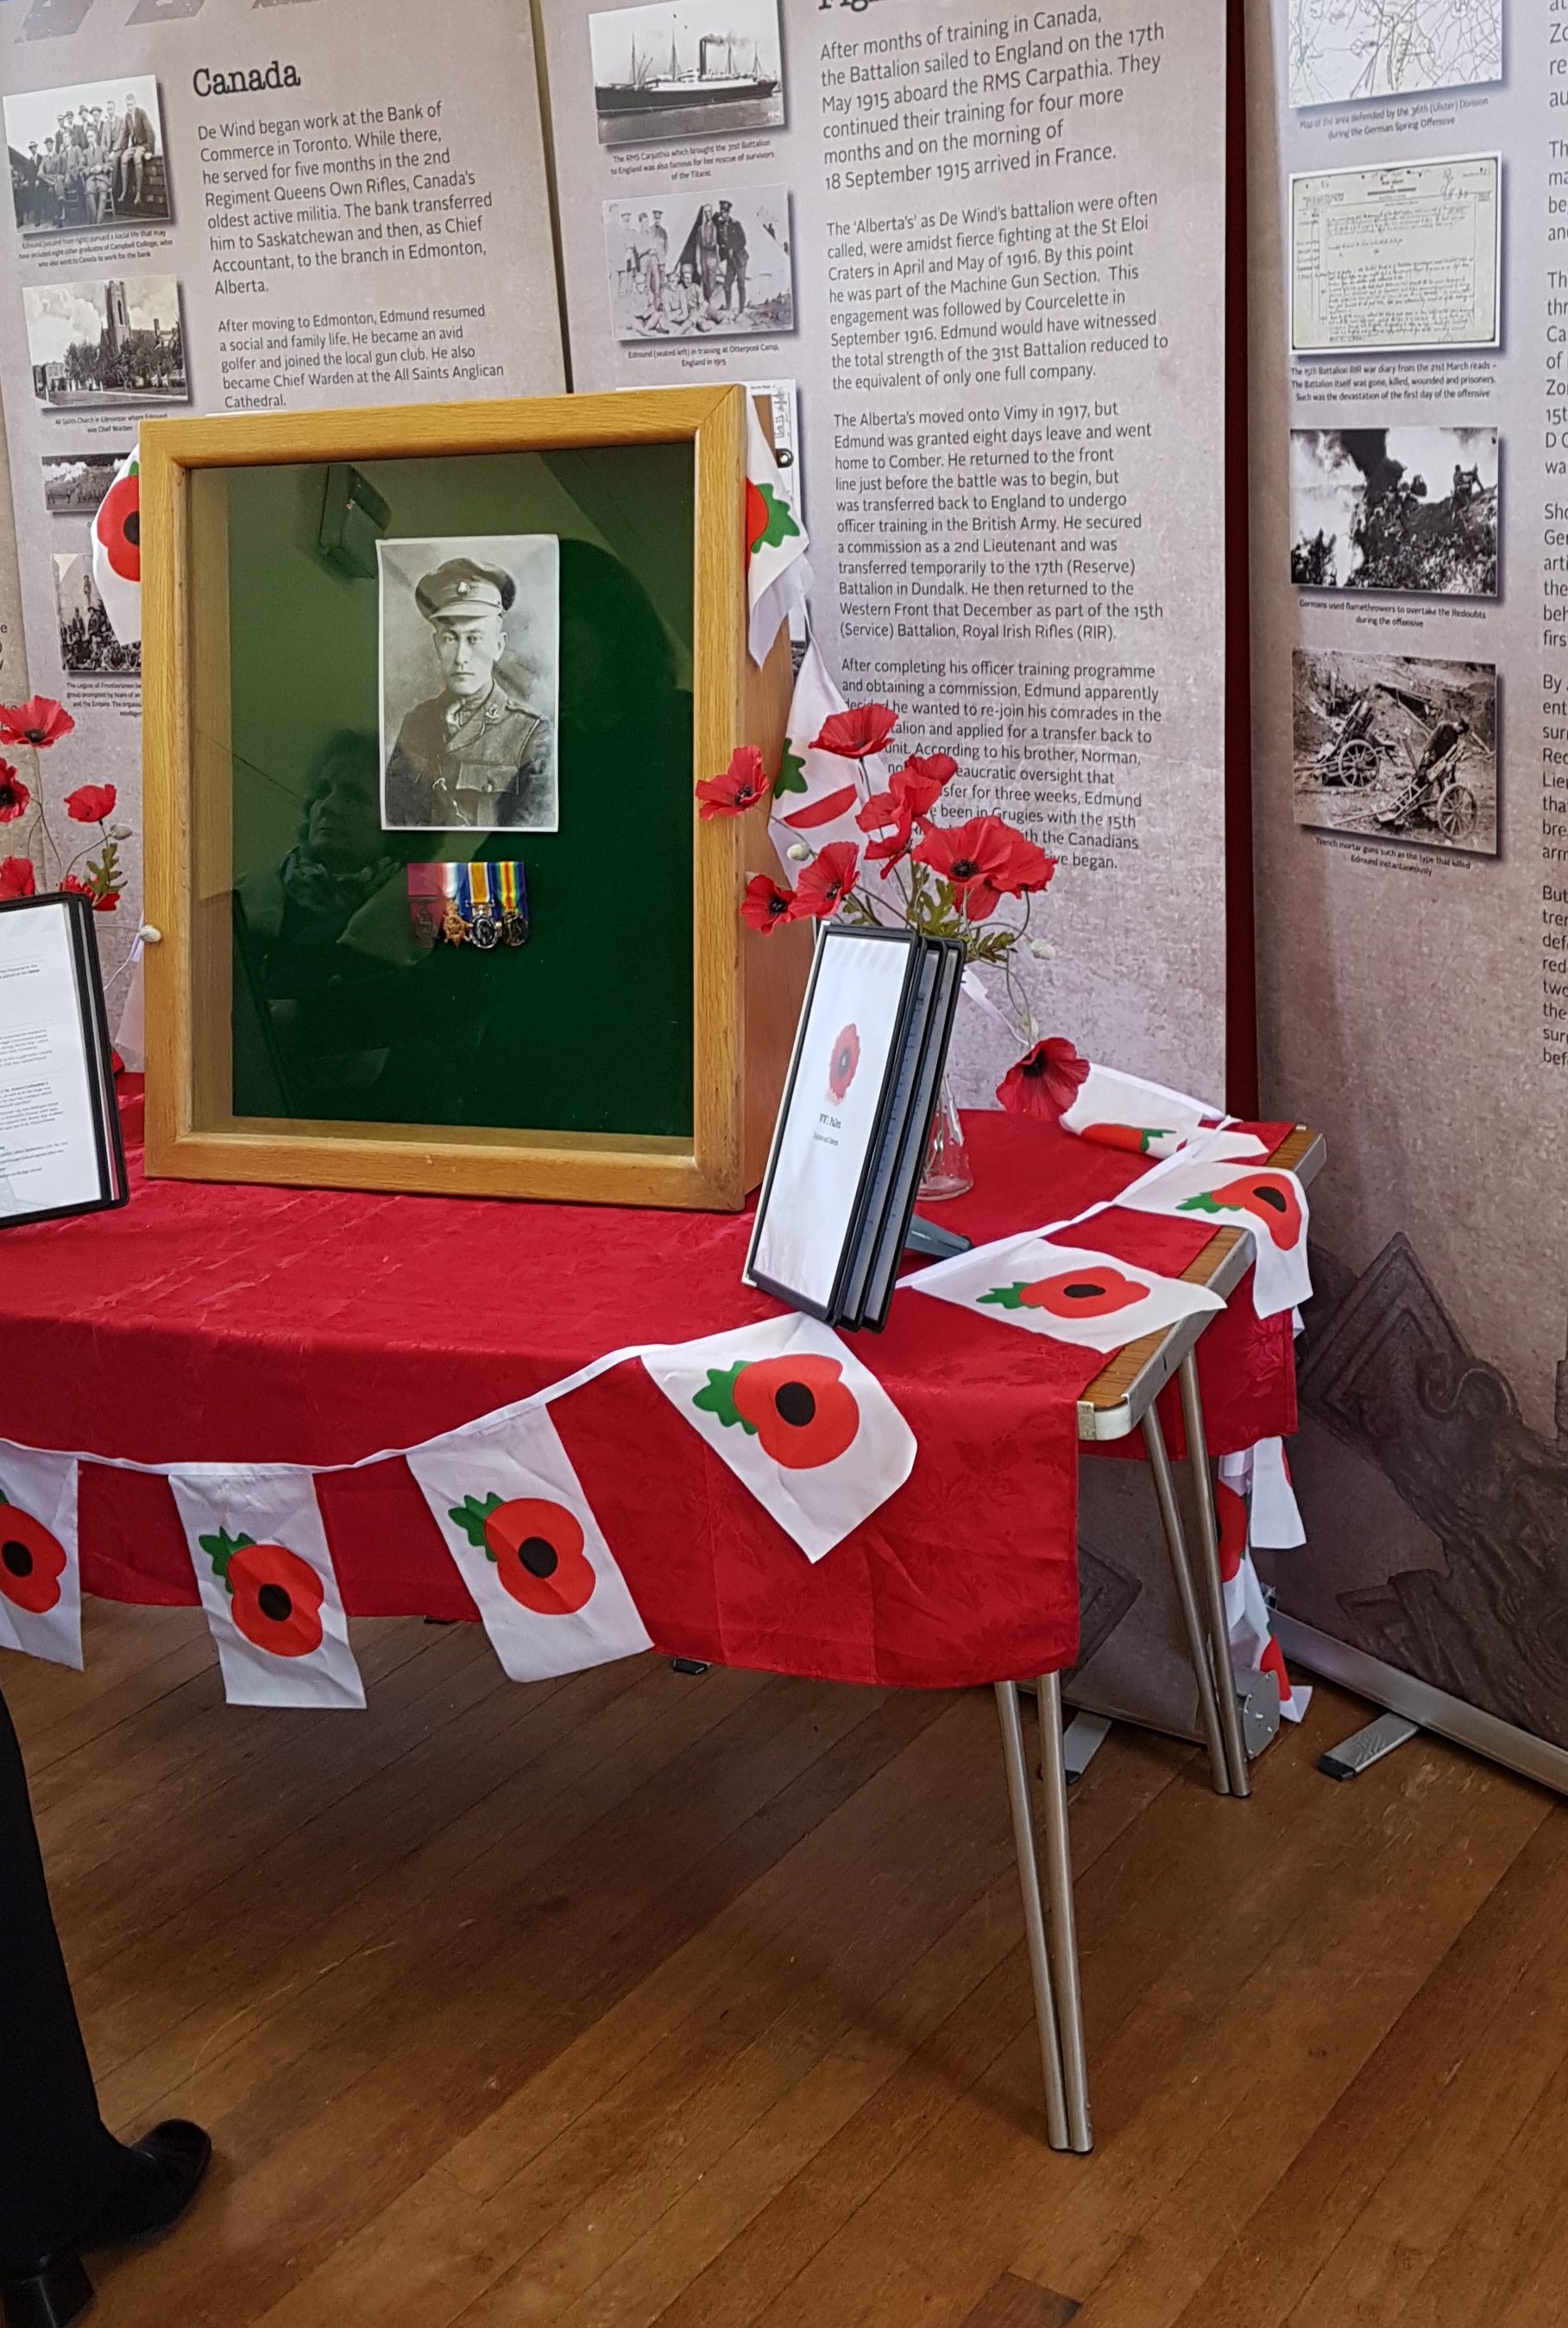 Display at the unveiling of the memorial